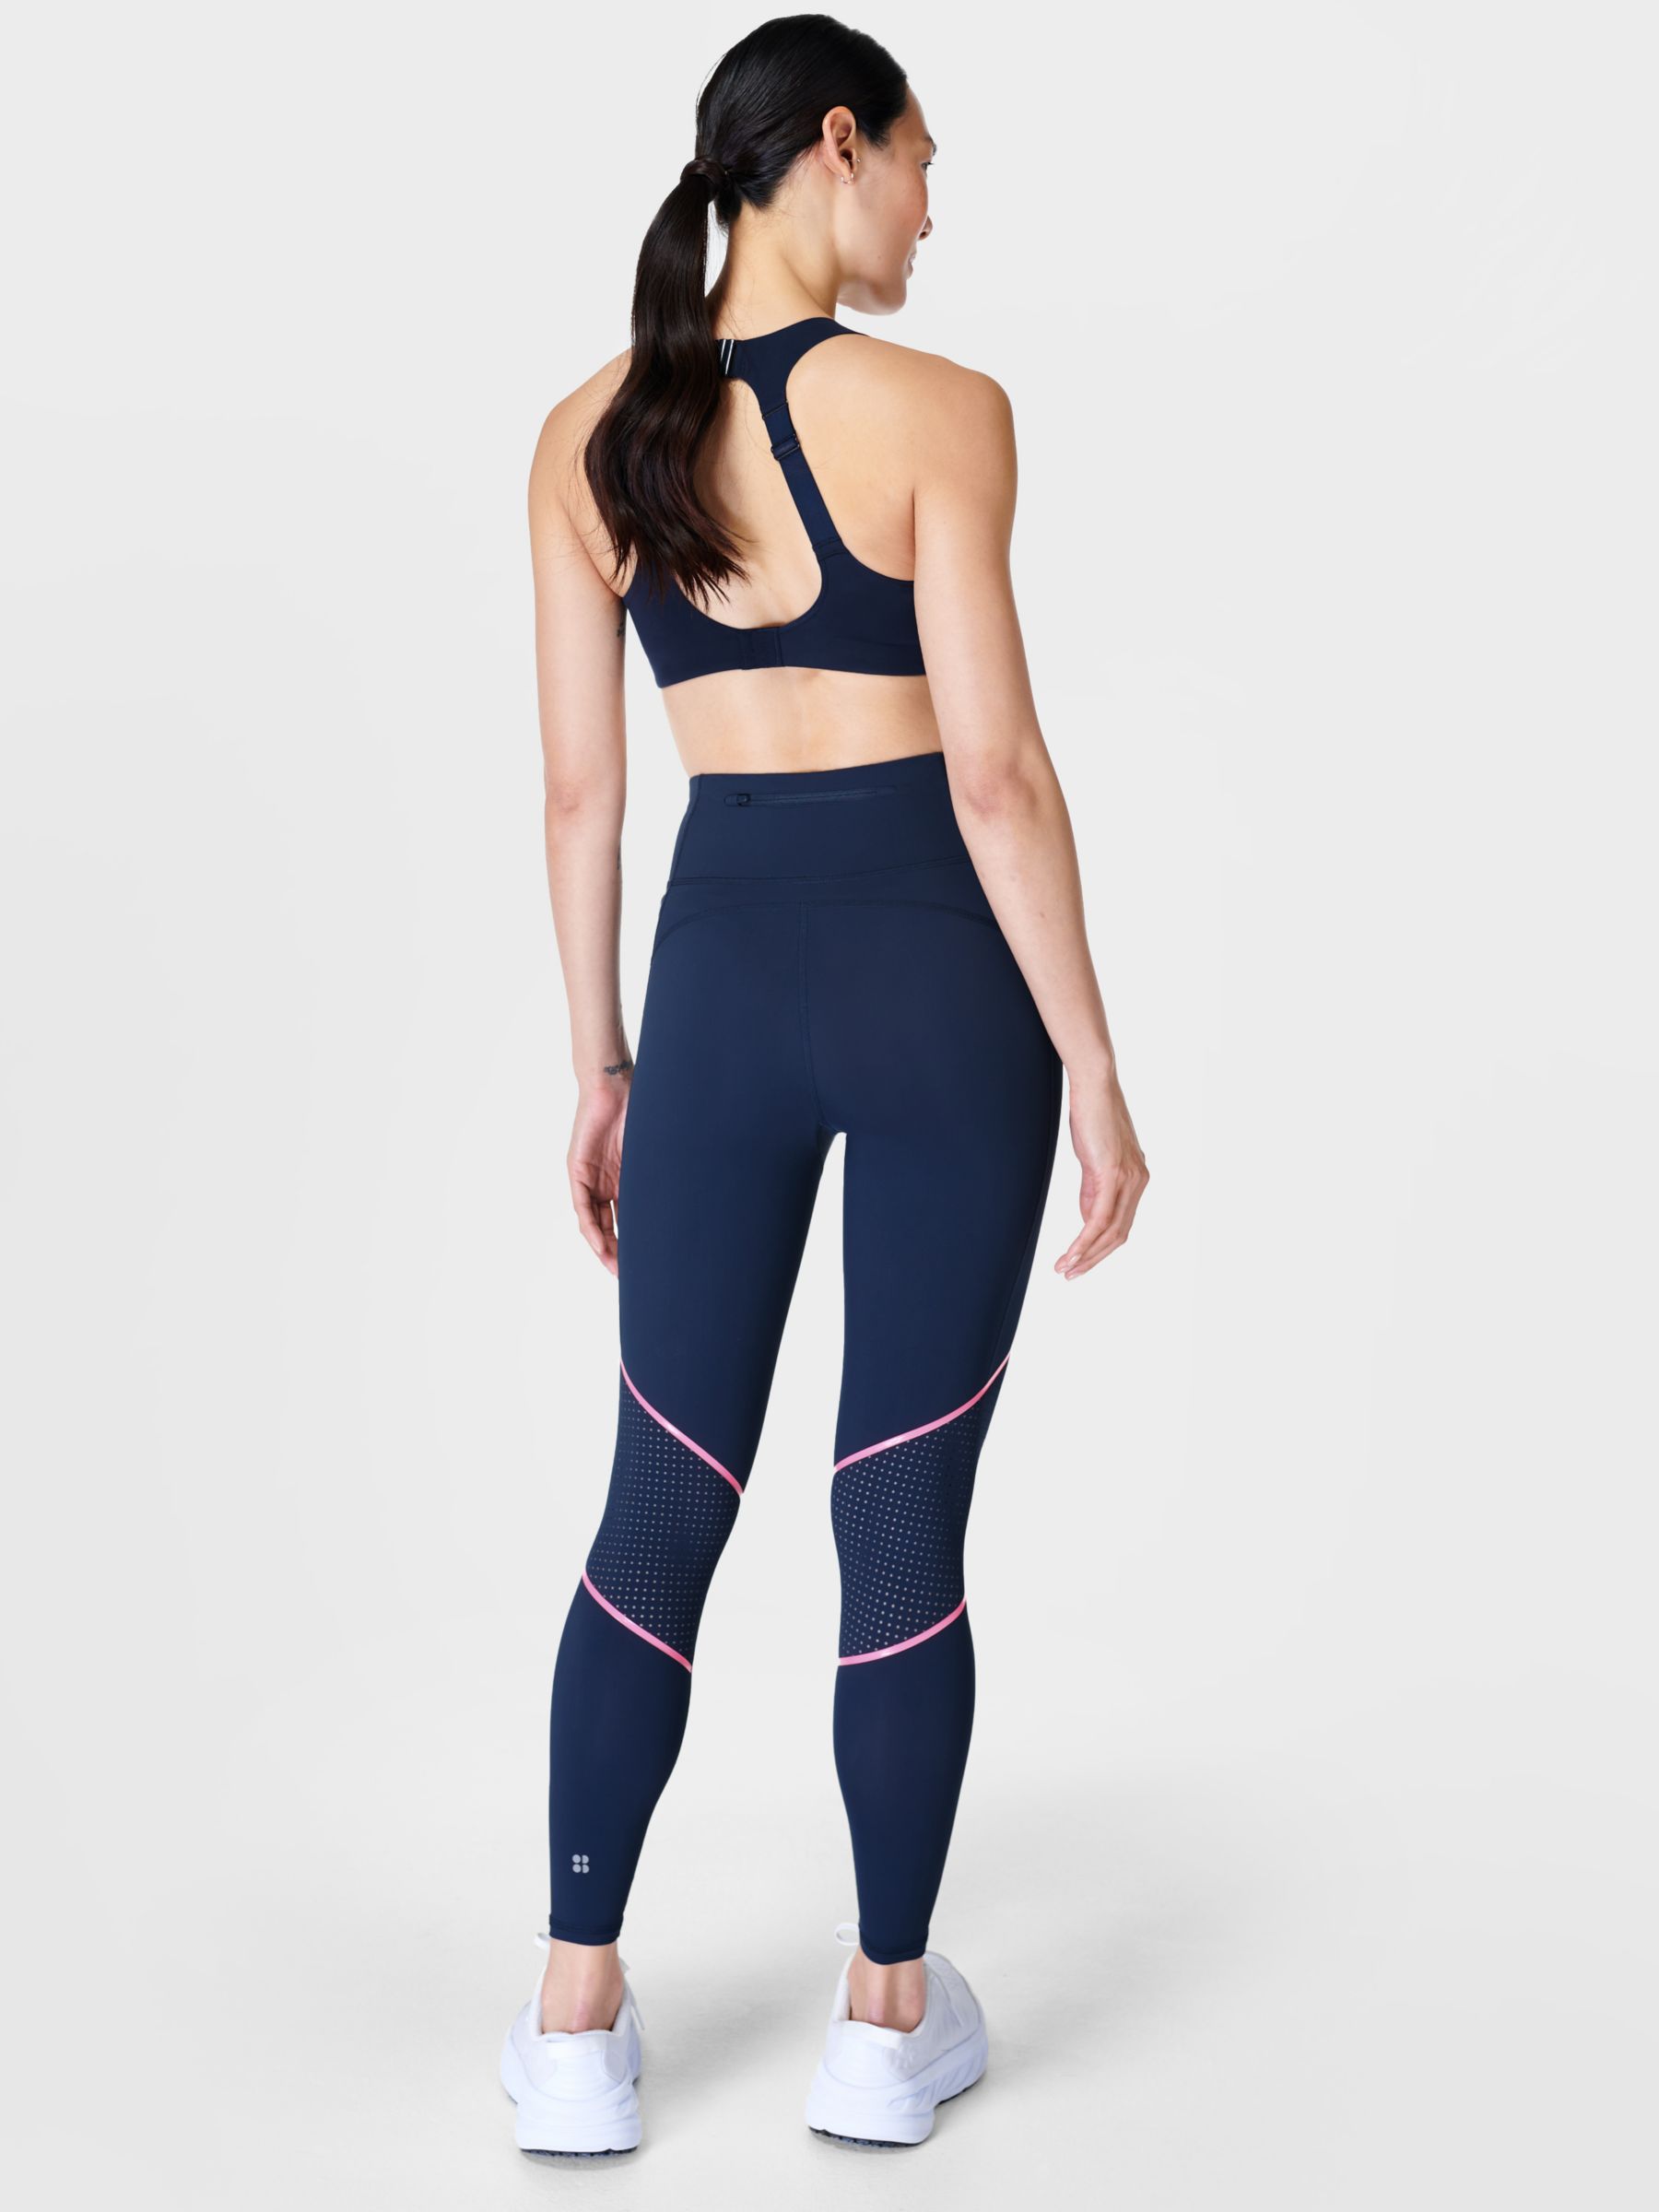 Sweaty Betty Power 7/8 Gym Leggings, Pink Scattered at John Lewis